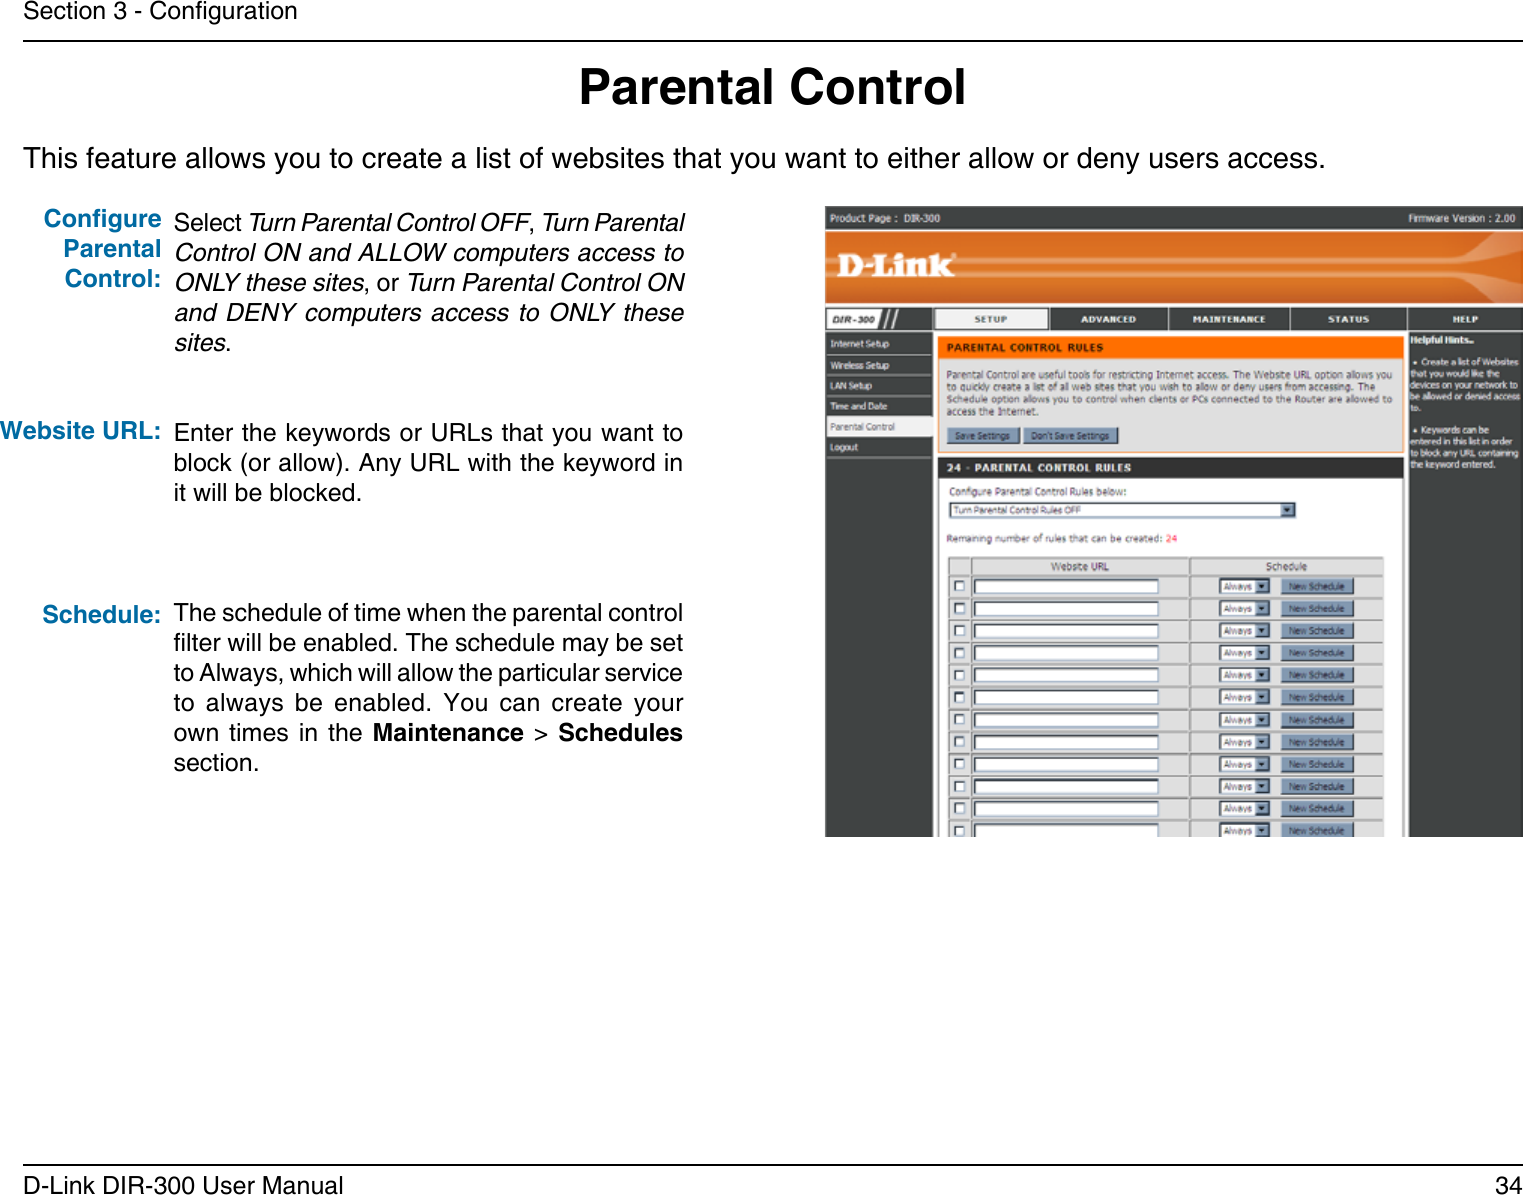 34D-Link DIR-300 User ManualSection 3 - CongurationThis feature allows you to create a list of websites that you want to either allow or deny users access.Parental ControlSelect Turn Parental Control OFF, Turn Parental Control ON and ALLOW computers access to ONLY these sites, or Turn Parental Control ON and DENY computers access to ONLY these sites.Enter the keywords or URLs that you want to block (or allow). Any URL with the keyword in it will be blocked.The schedule of time when the parental control lter will be enabled. The schedule may be set to Always, which will allow the particular service to  always  be  enabled.  You  can  create  your own times  in  the  Maintenance &gt; Schedules section.Congure Parental Control:Website URL:Schedule: